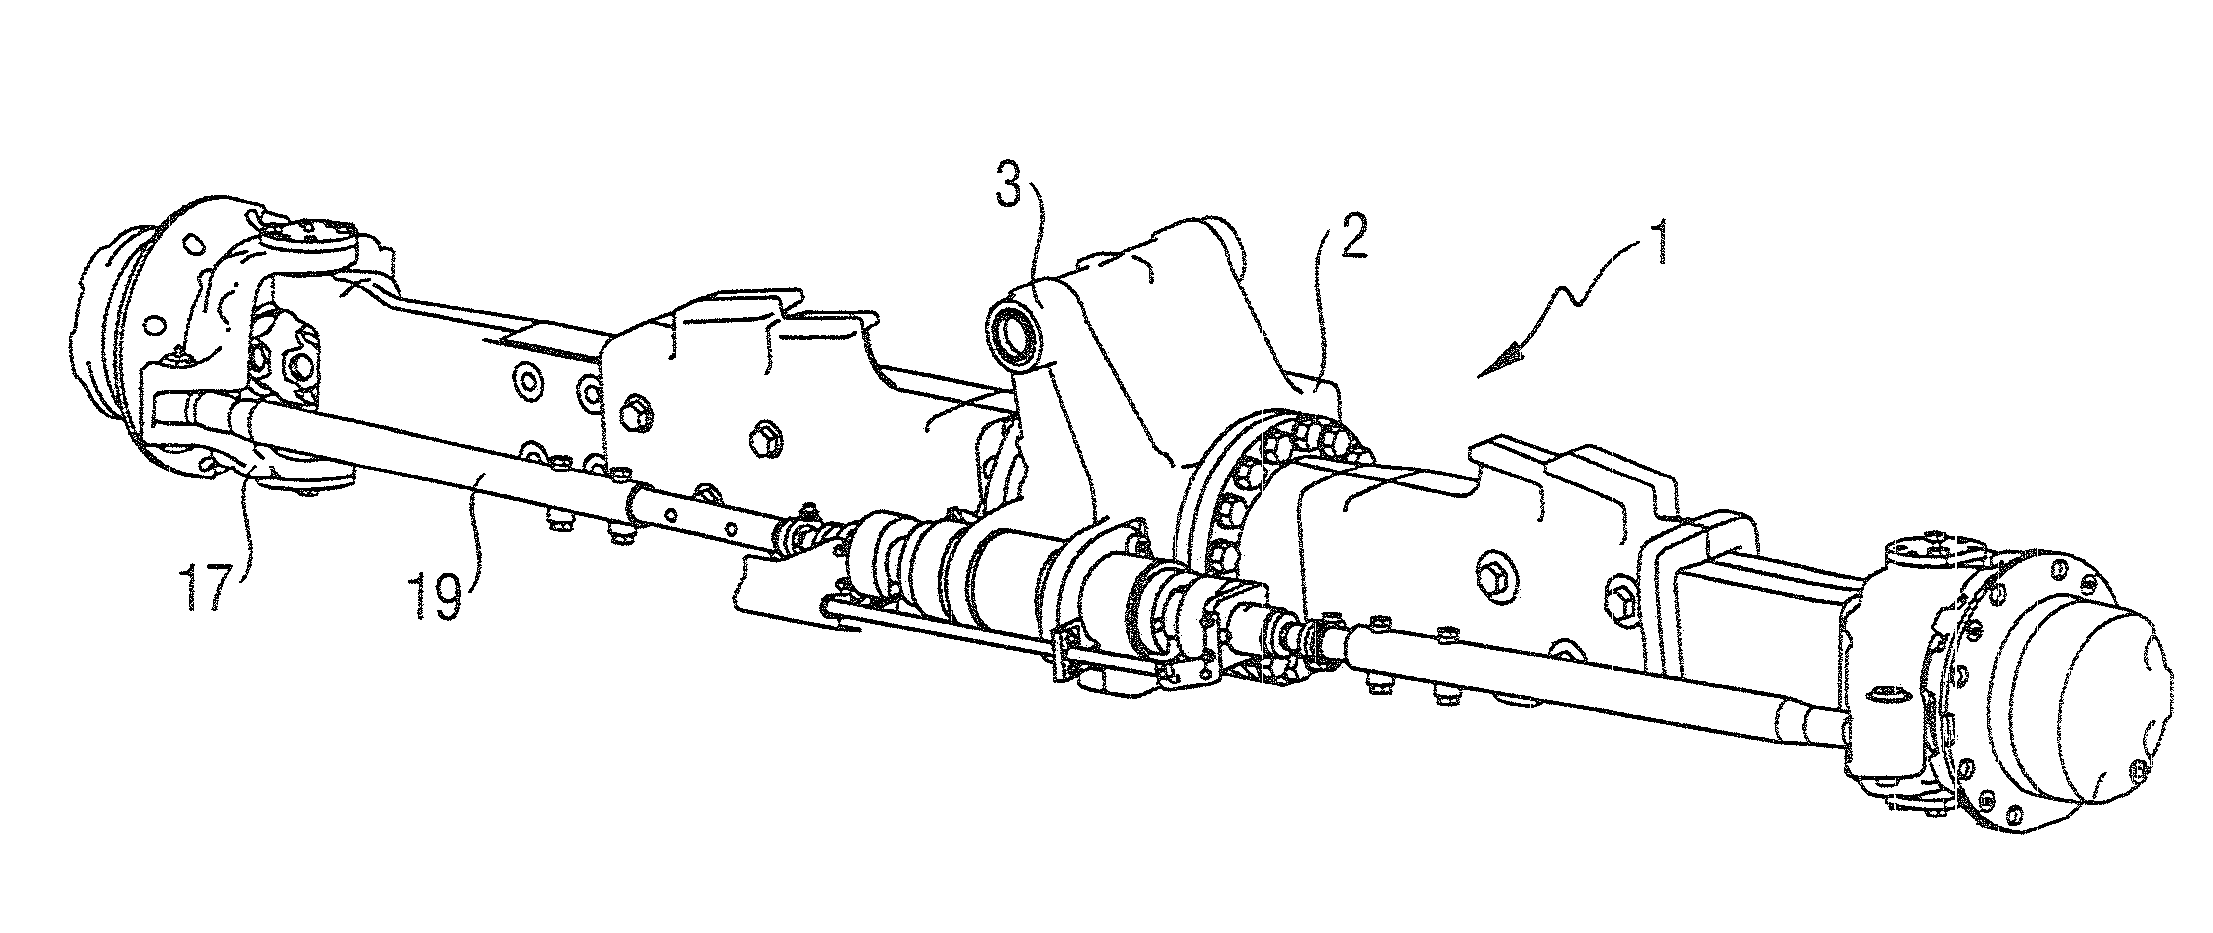 Steering axle for agricultural vehicles